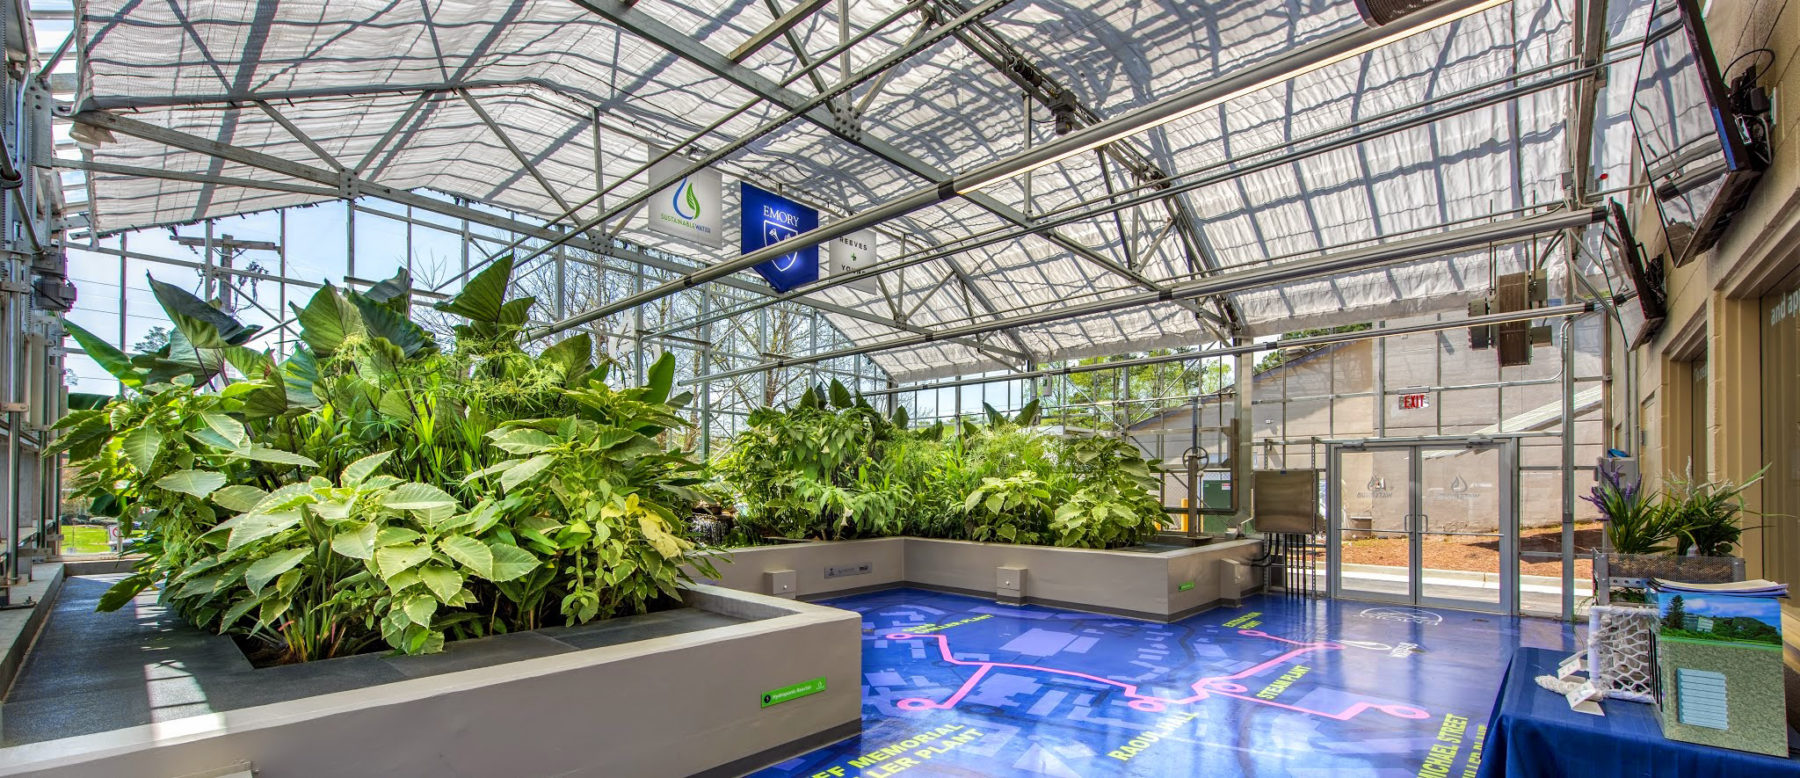 The Emory University WaterHub is an existing blackwater recycling system that reduces the campus’s potable water demand